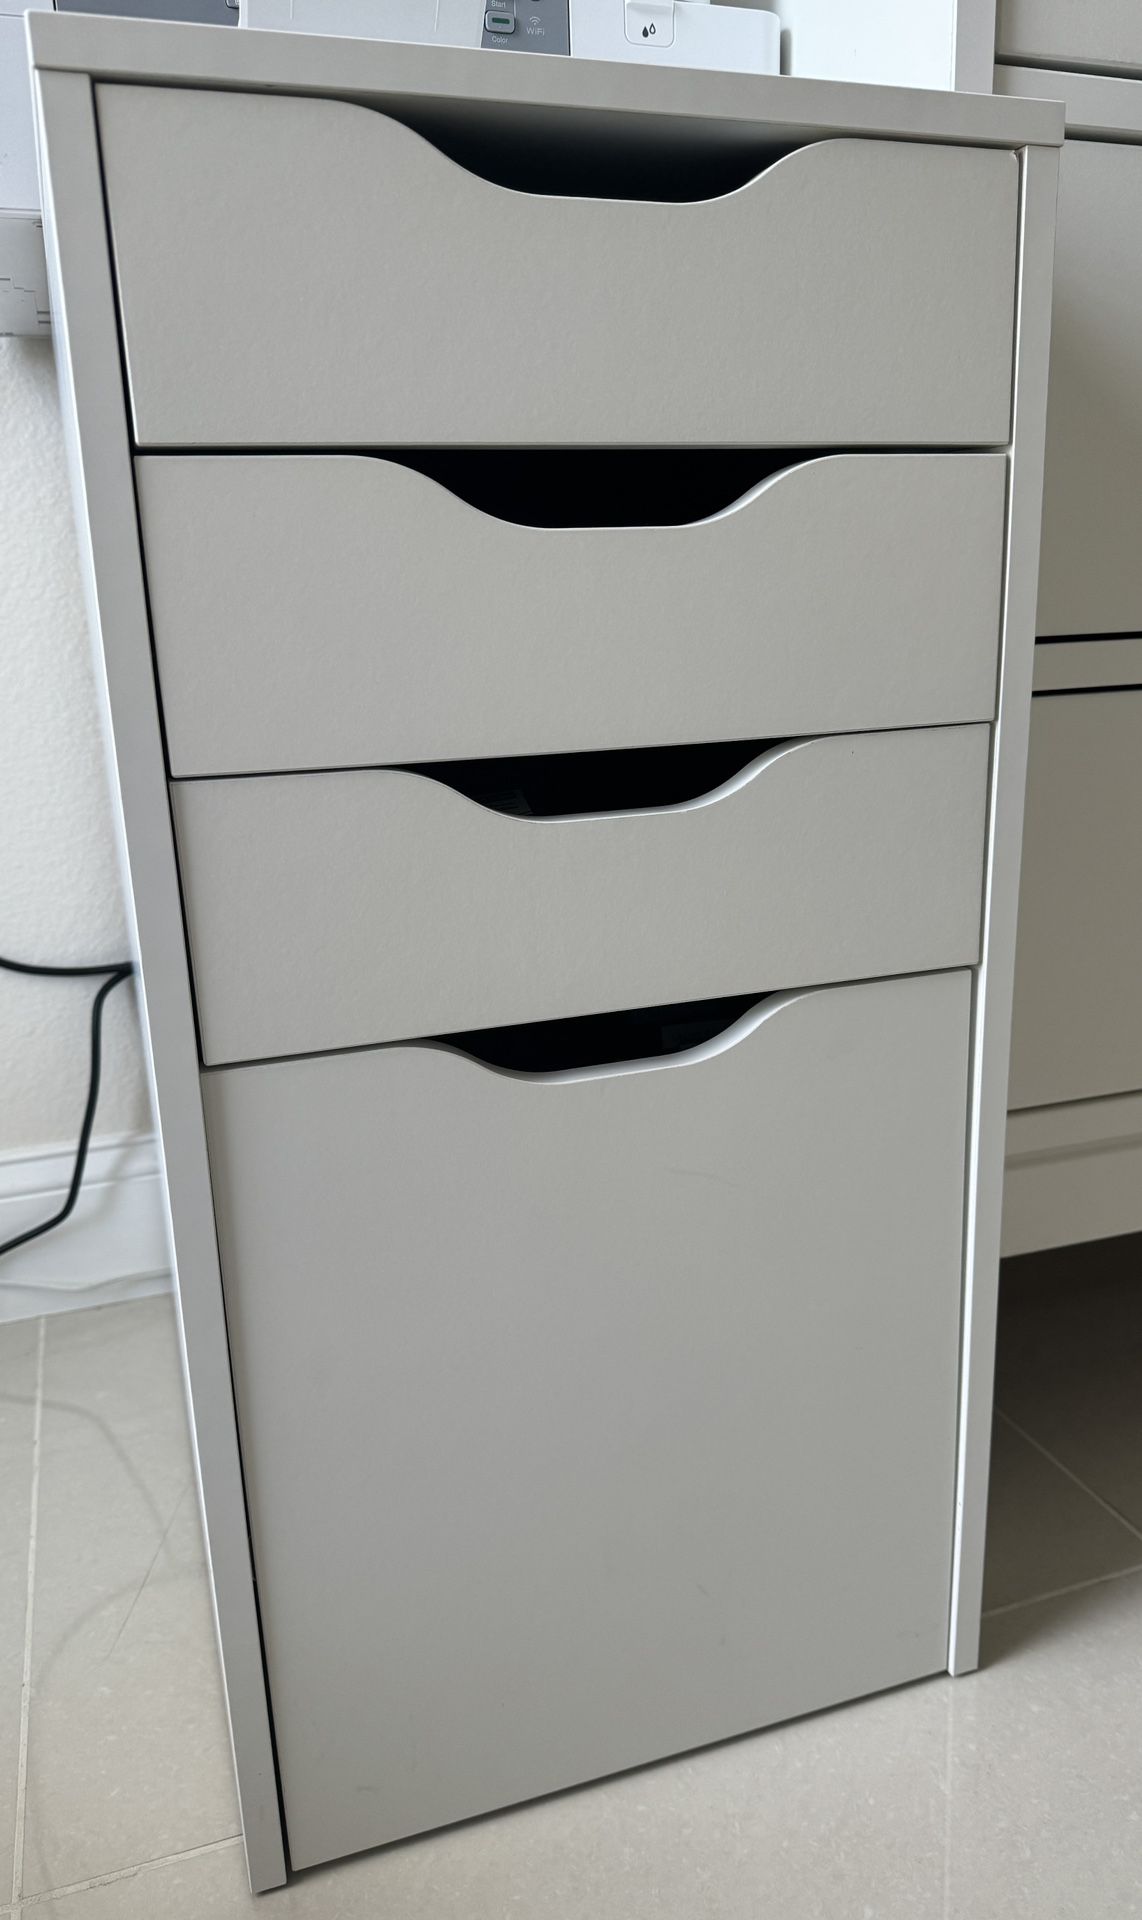 File cabinet from ikea - original price was $250